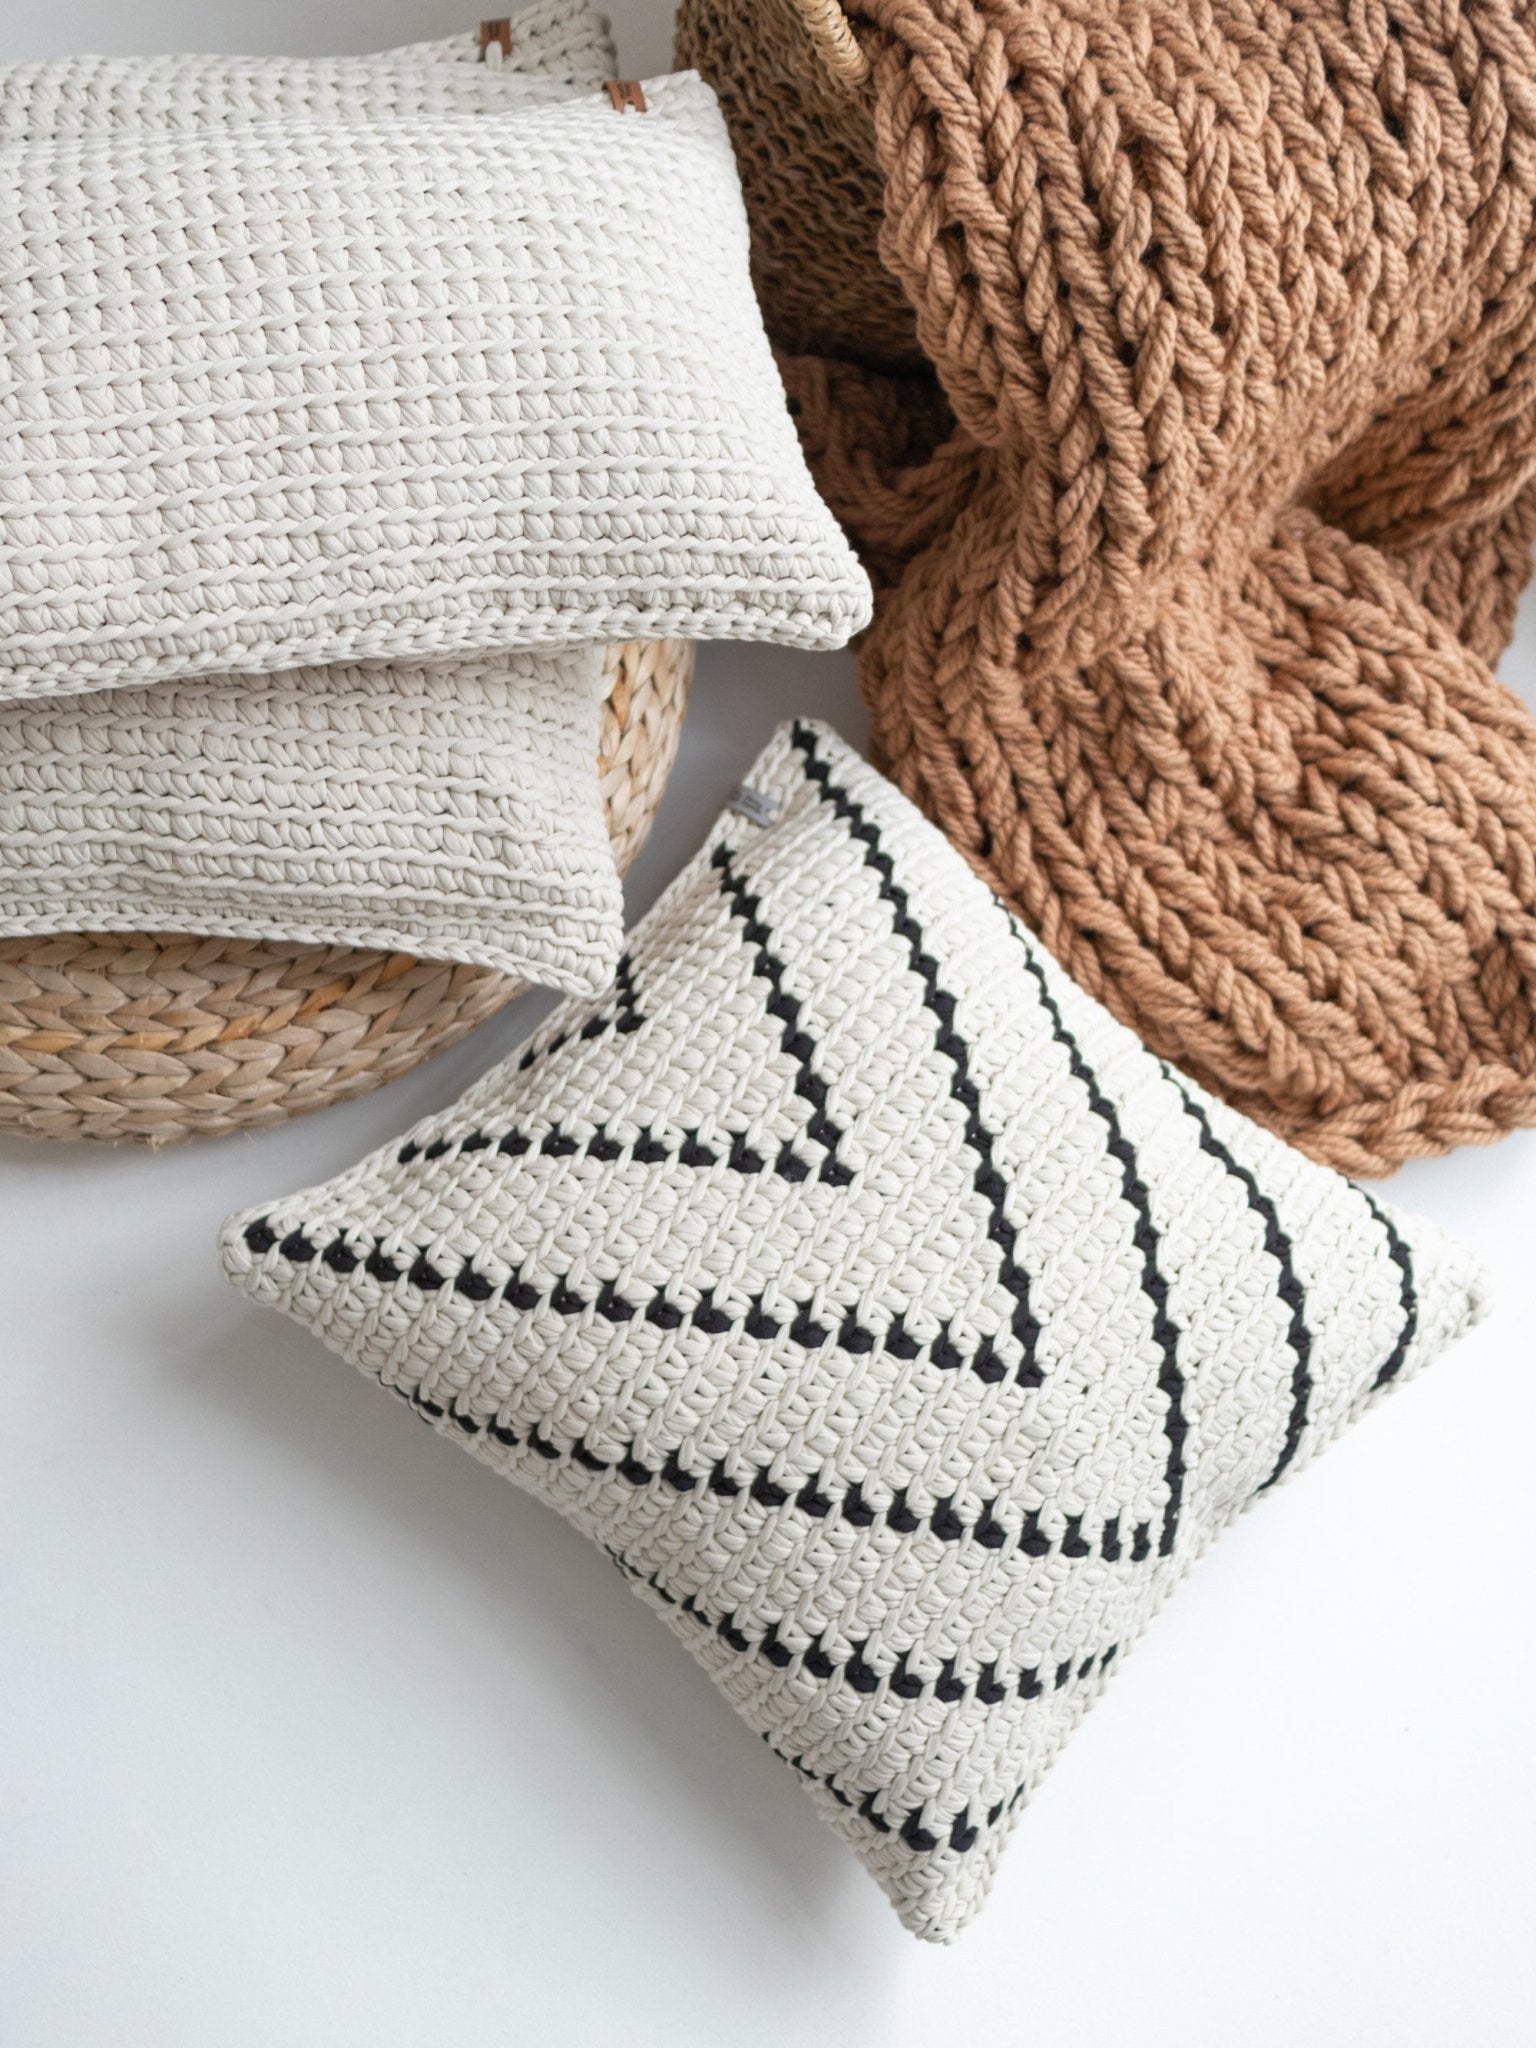 PATTERNED HANDKNIT PILLOW IVORY AND BLACK 20” - The Modern Heritage